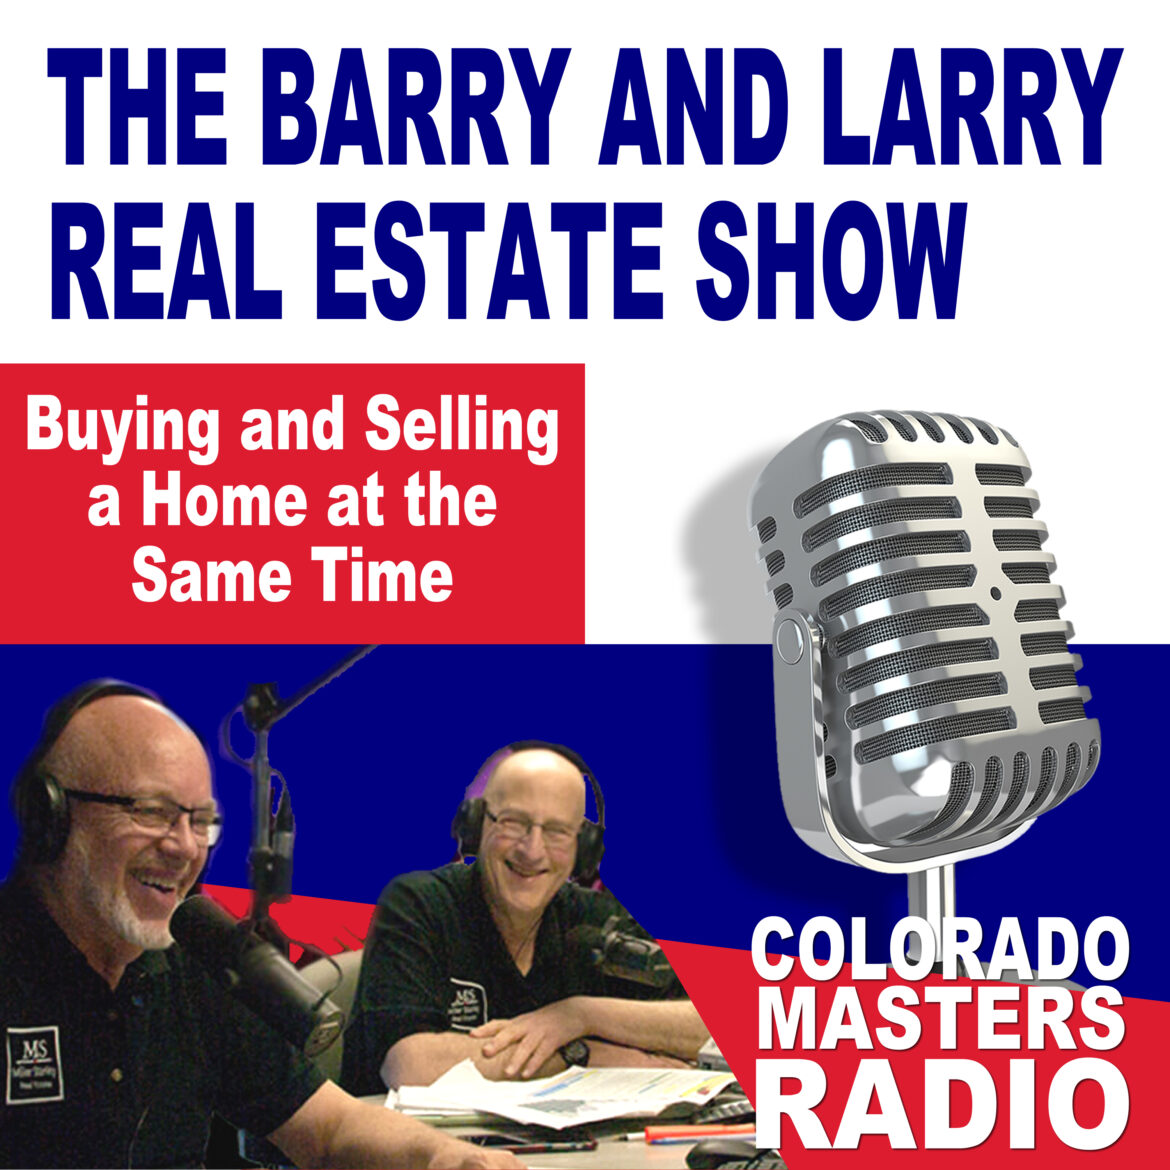 The Larry and Barry Real Estate Show - Buying and Selling a Home at the Same Time